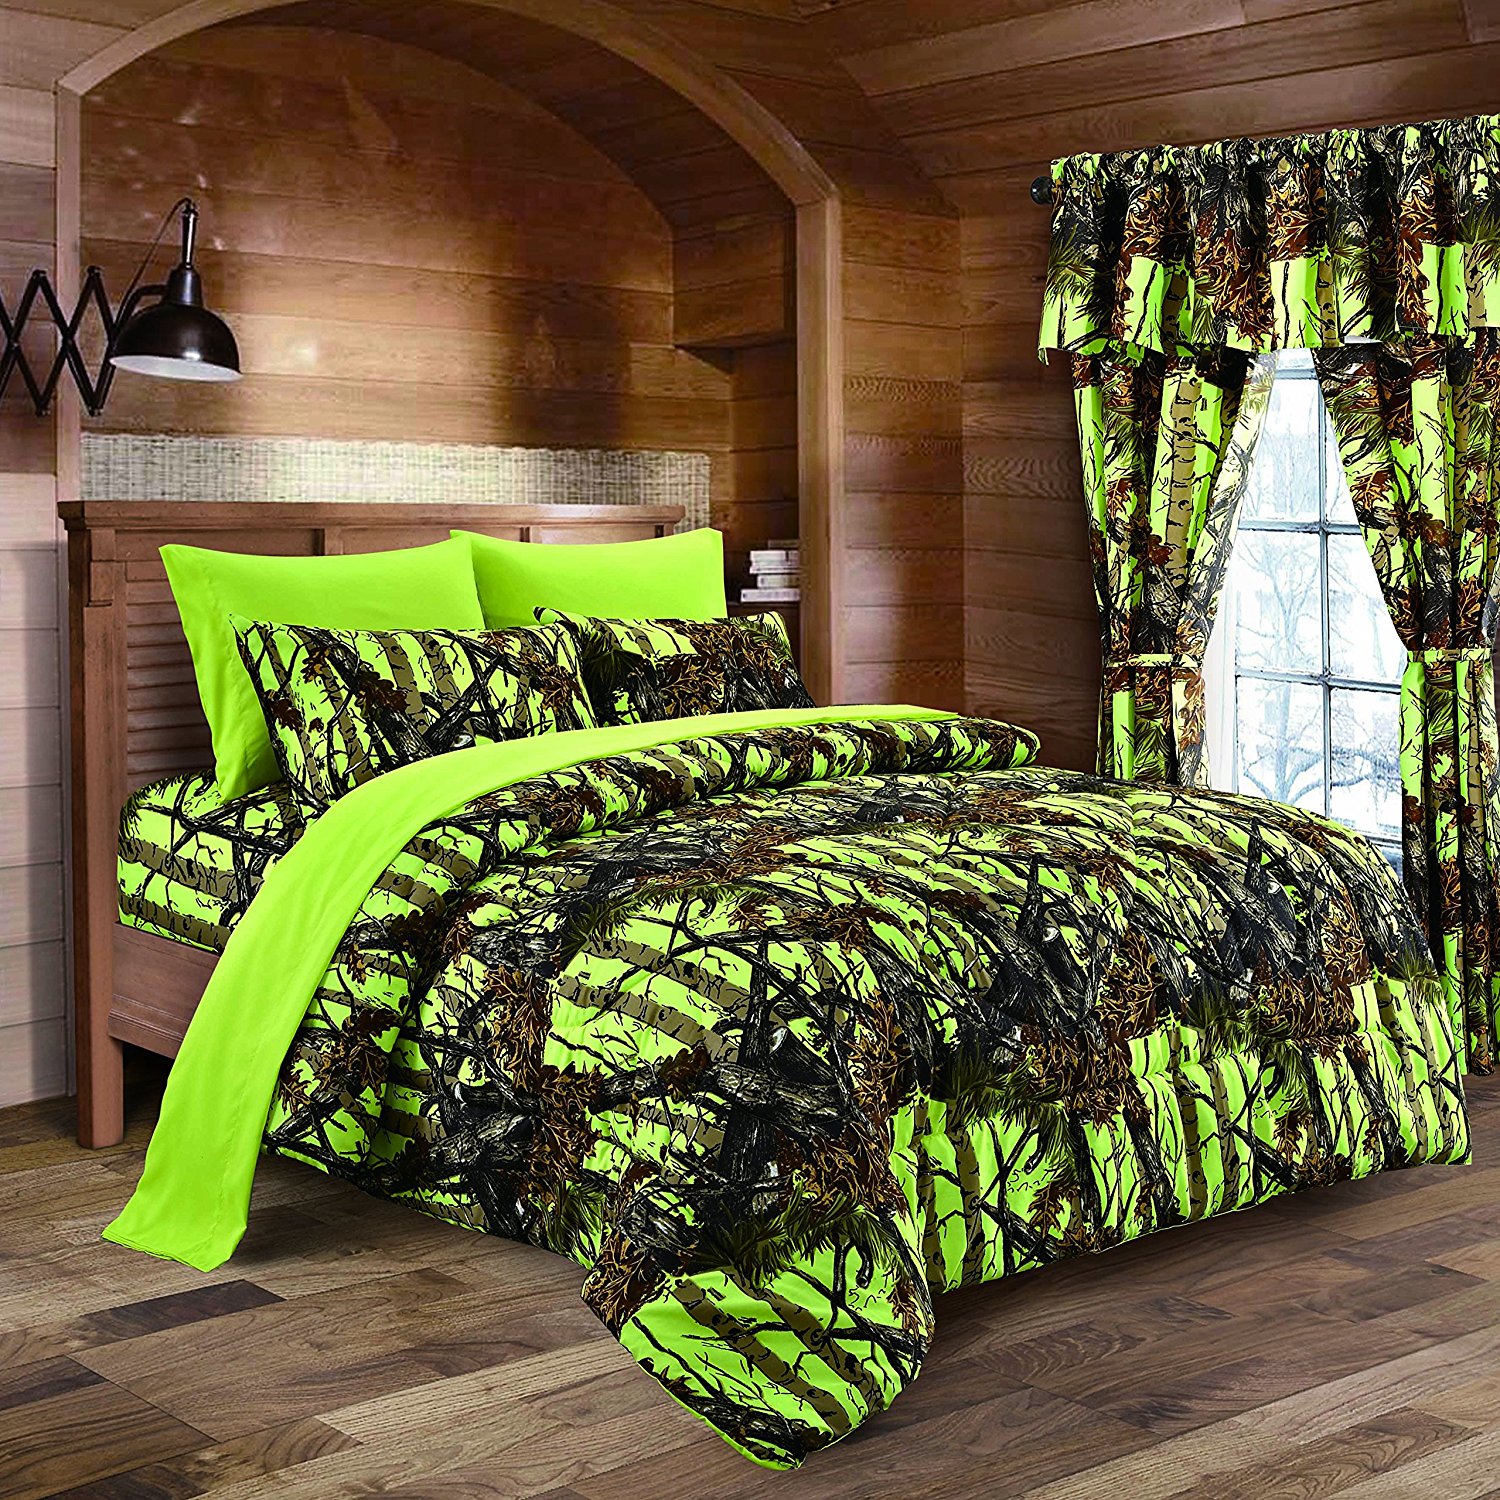 The Woods Lime Green Camouflage Full 8pc Premium Luxury Comforter, Sheet, Pillowcases, and Bed Skirt Set by Regal Comfort Camo Bedding Set For Hunters Cabin or Rustic Lodge Teens Boys and Girls